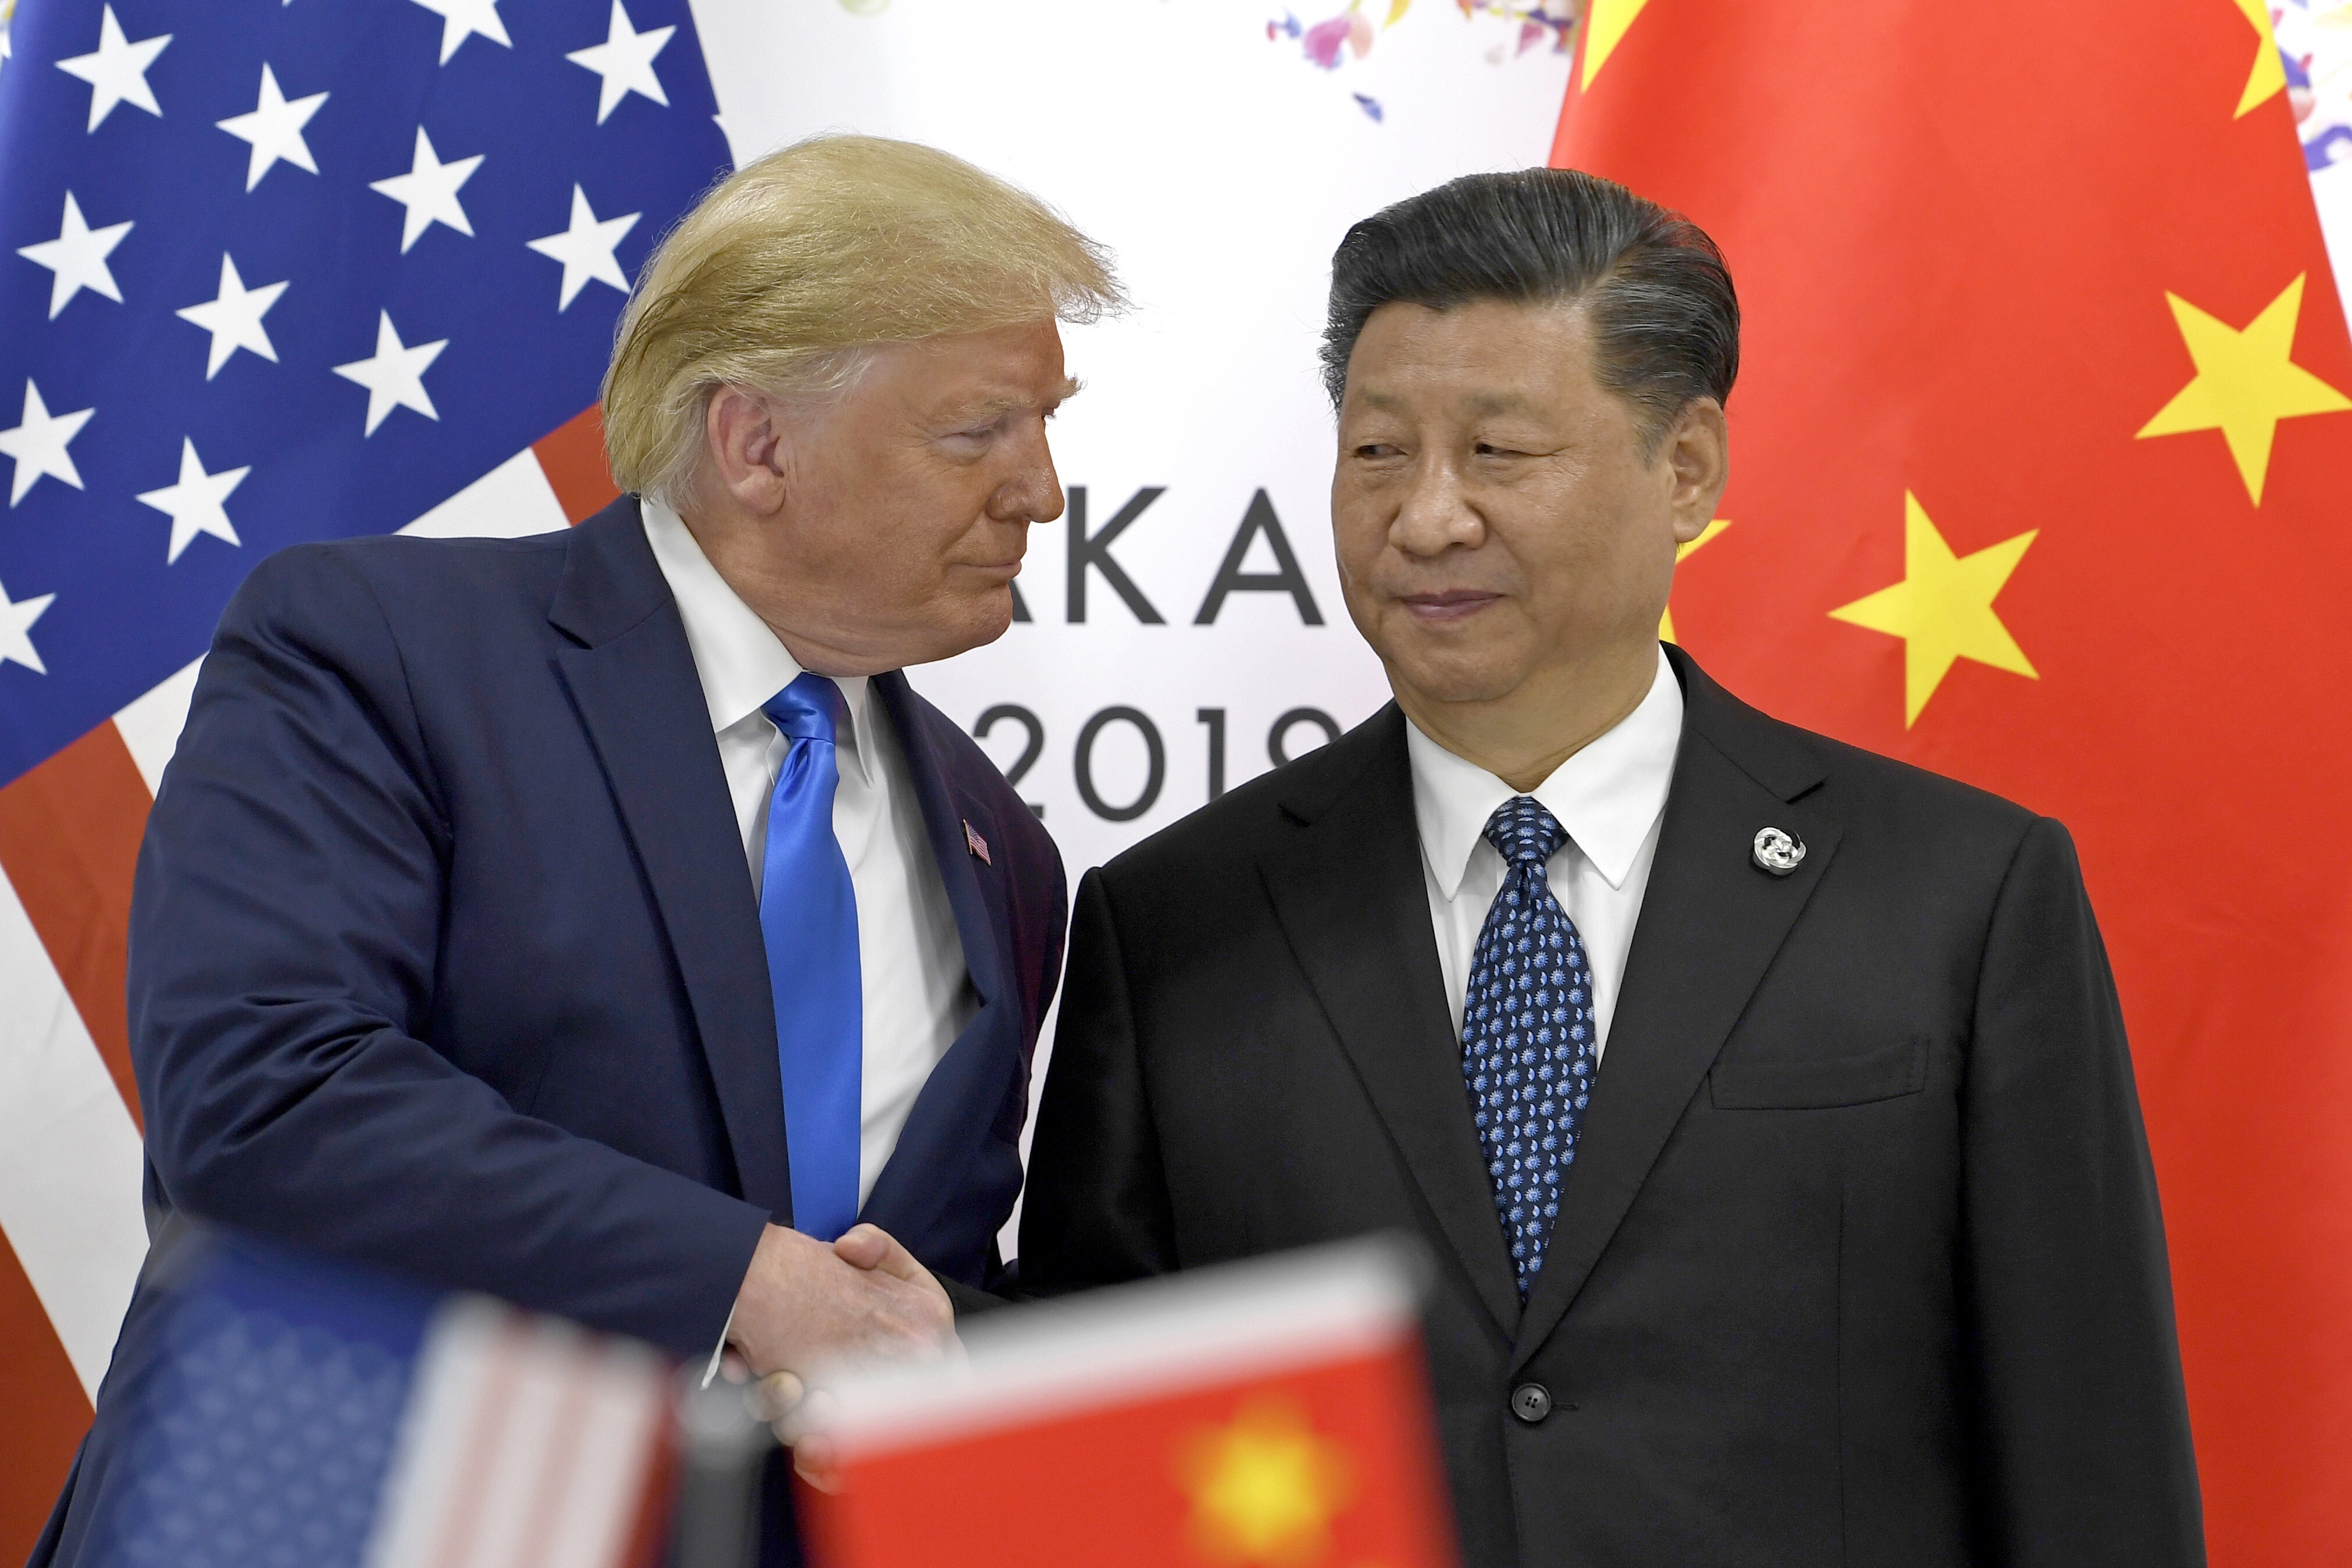 US President Donald Trump shakes hands with Chinese President Xi Jinping on the sidelines of the G20 summit in Osaka on June 29, 2019. File photo: AP